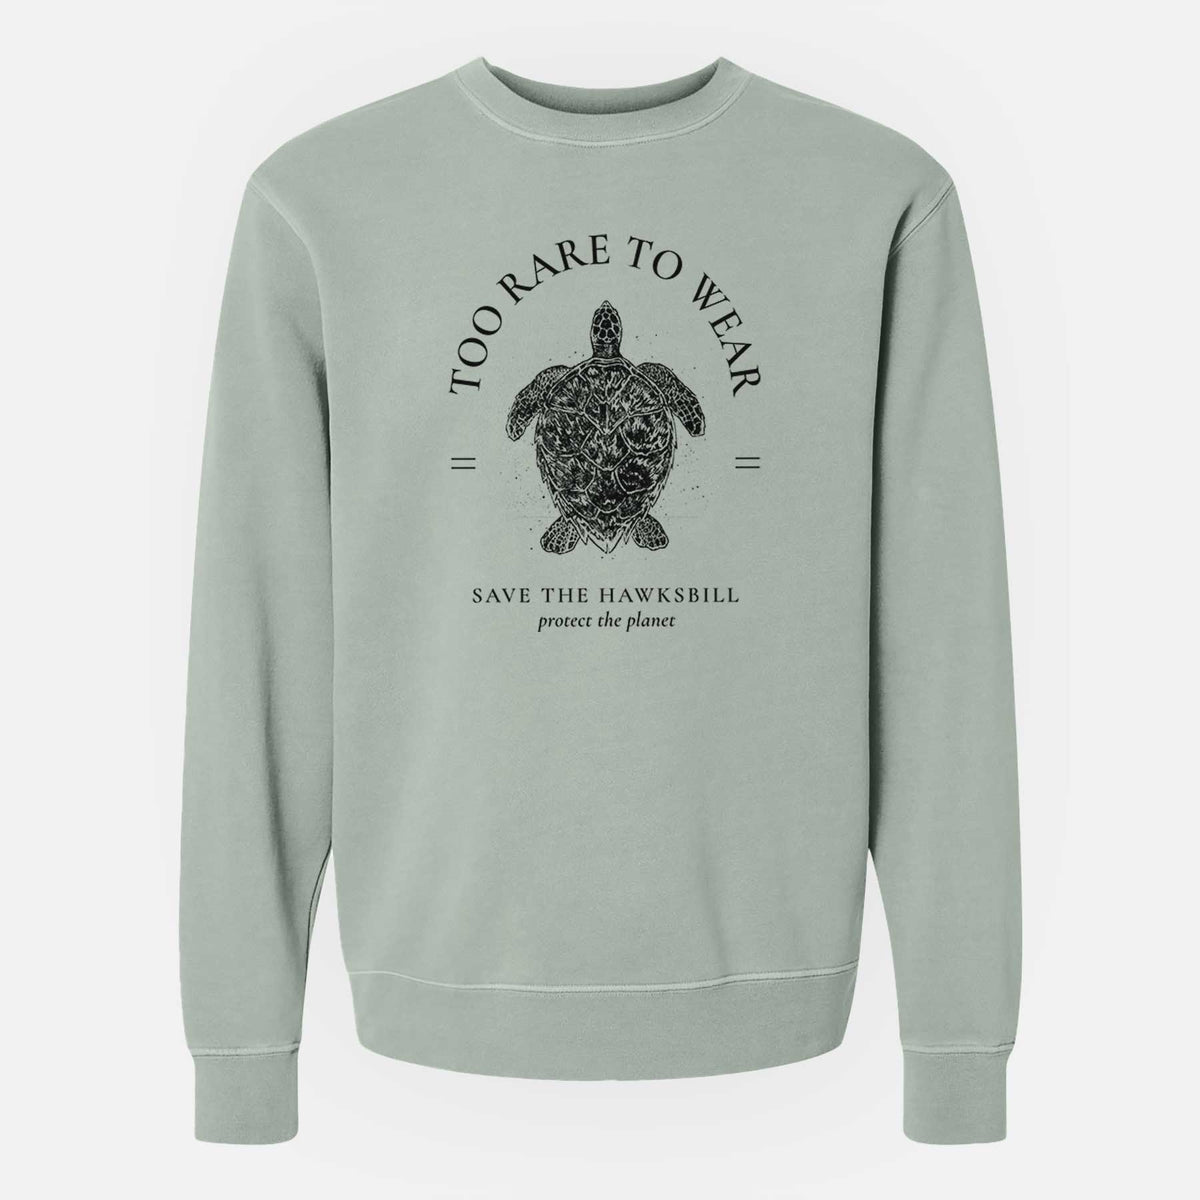 Too Rare to Wear - Save the Hawksbill - Unisex Pigment Dyed Crew Sweatshirt